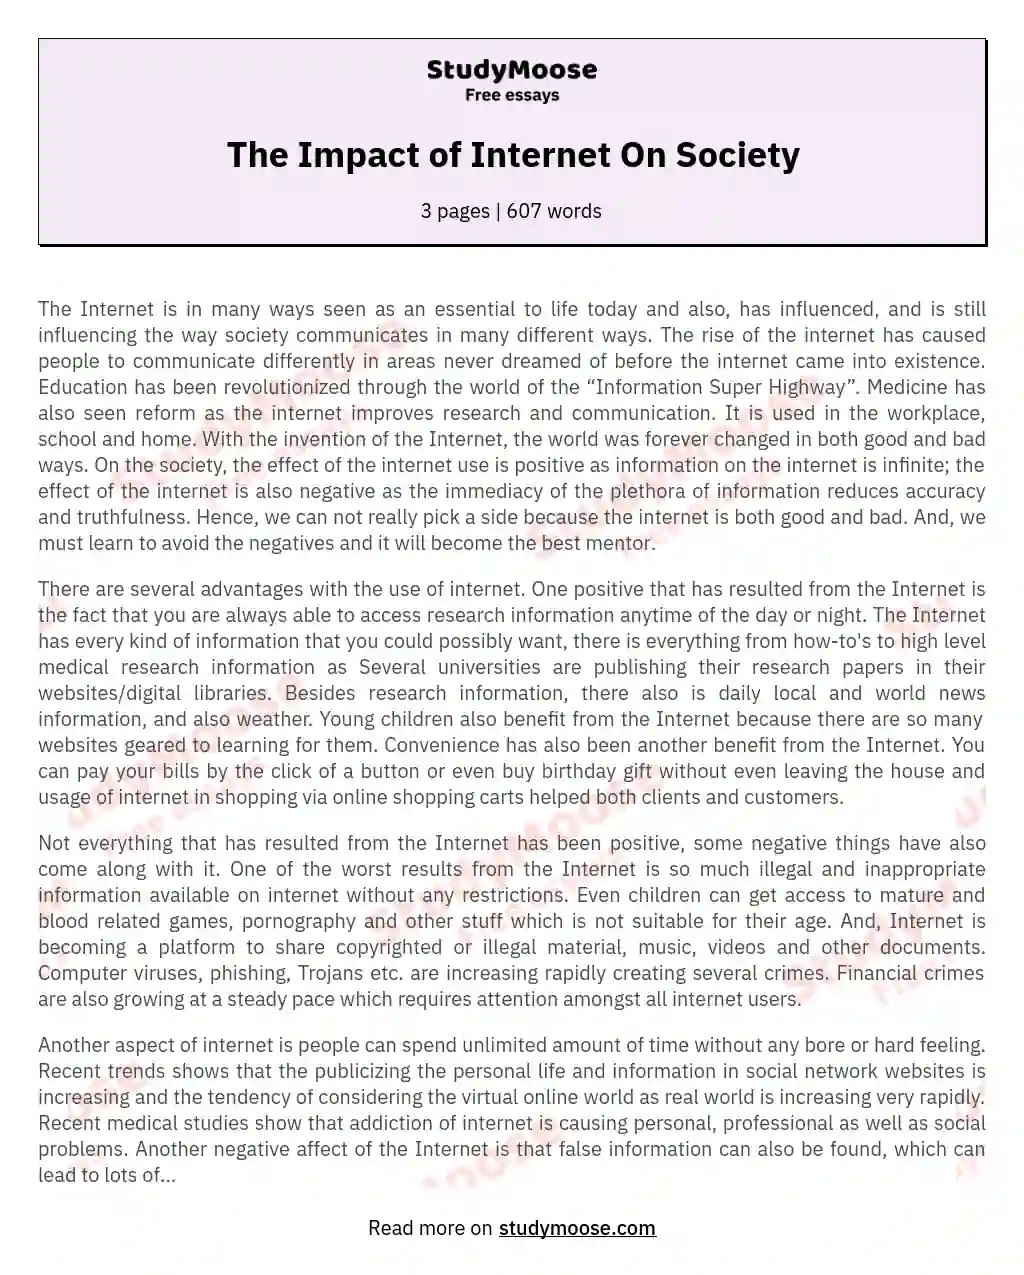 The Impact of Internet On Society essay